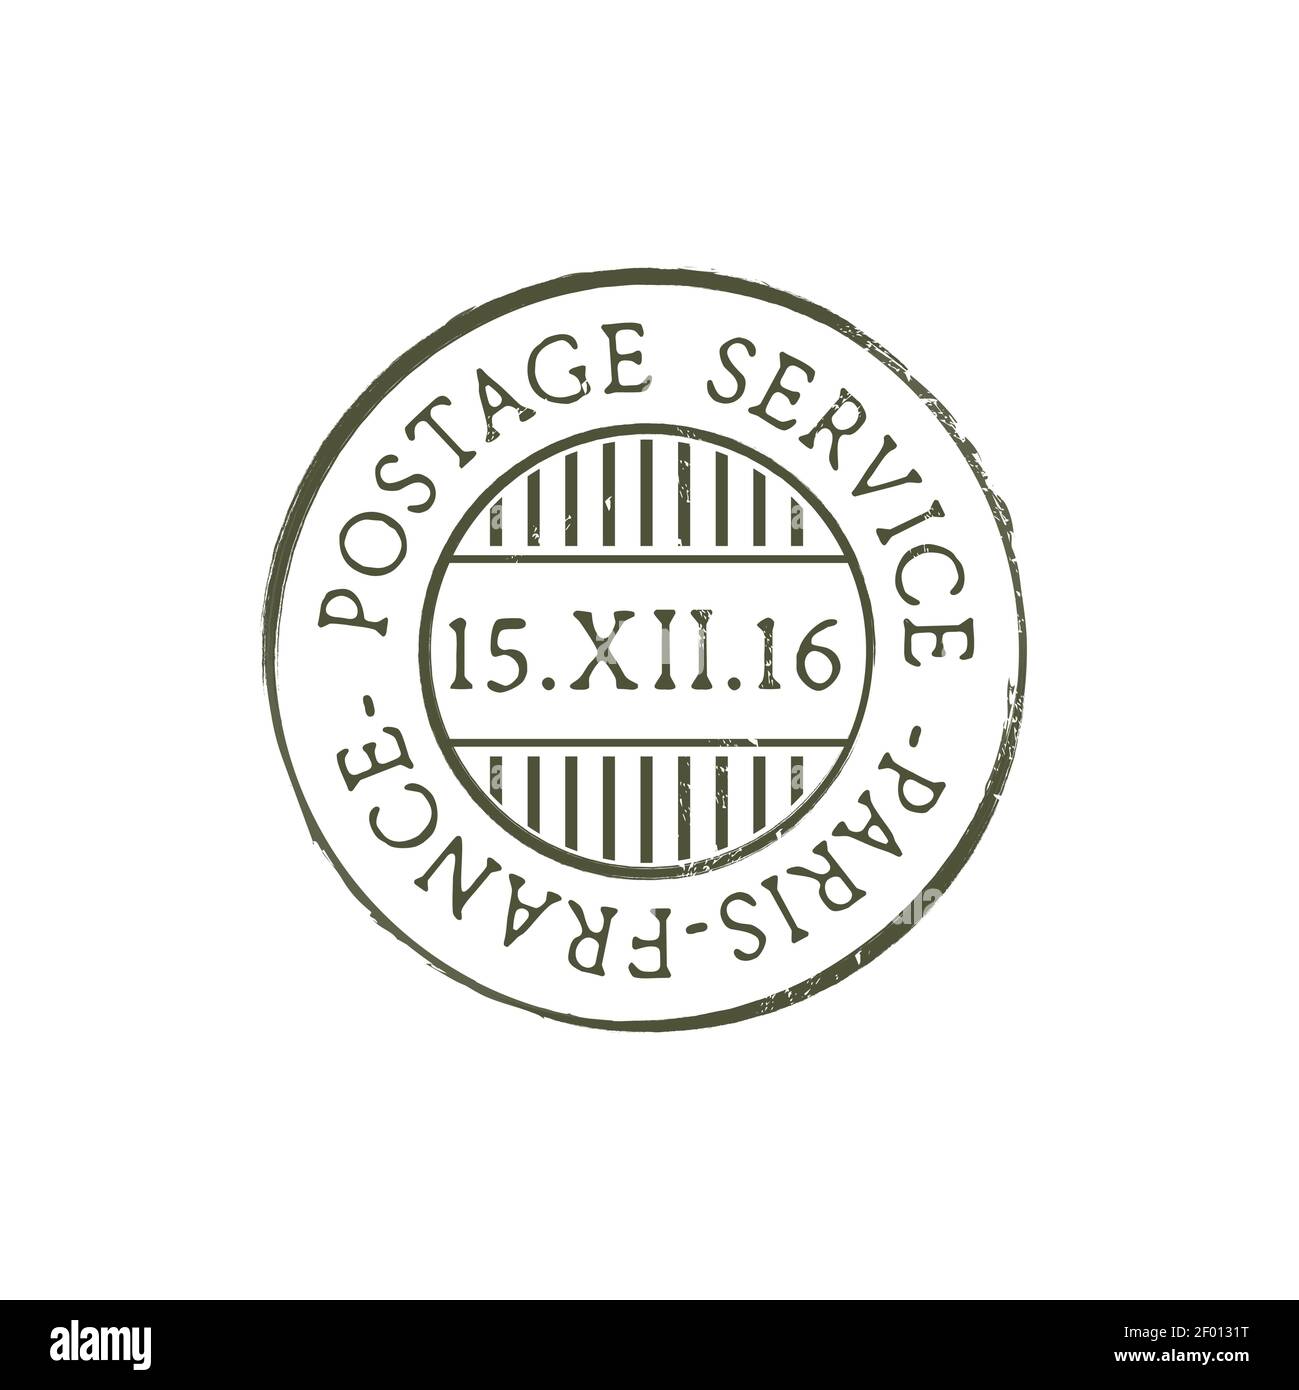 Postage of Paris stamp isolated icon. Vector France postage sign, grunge seal with date. Mailing correspondence symbol, express delivery sign. French Stock Vector